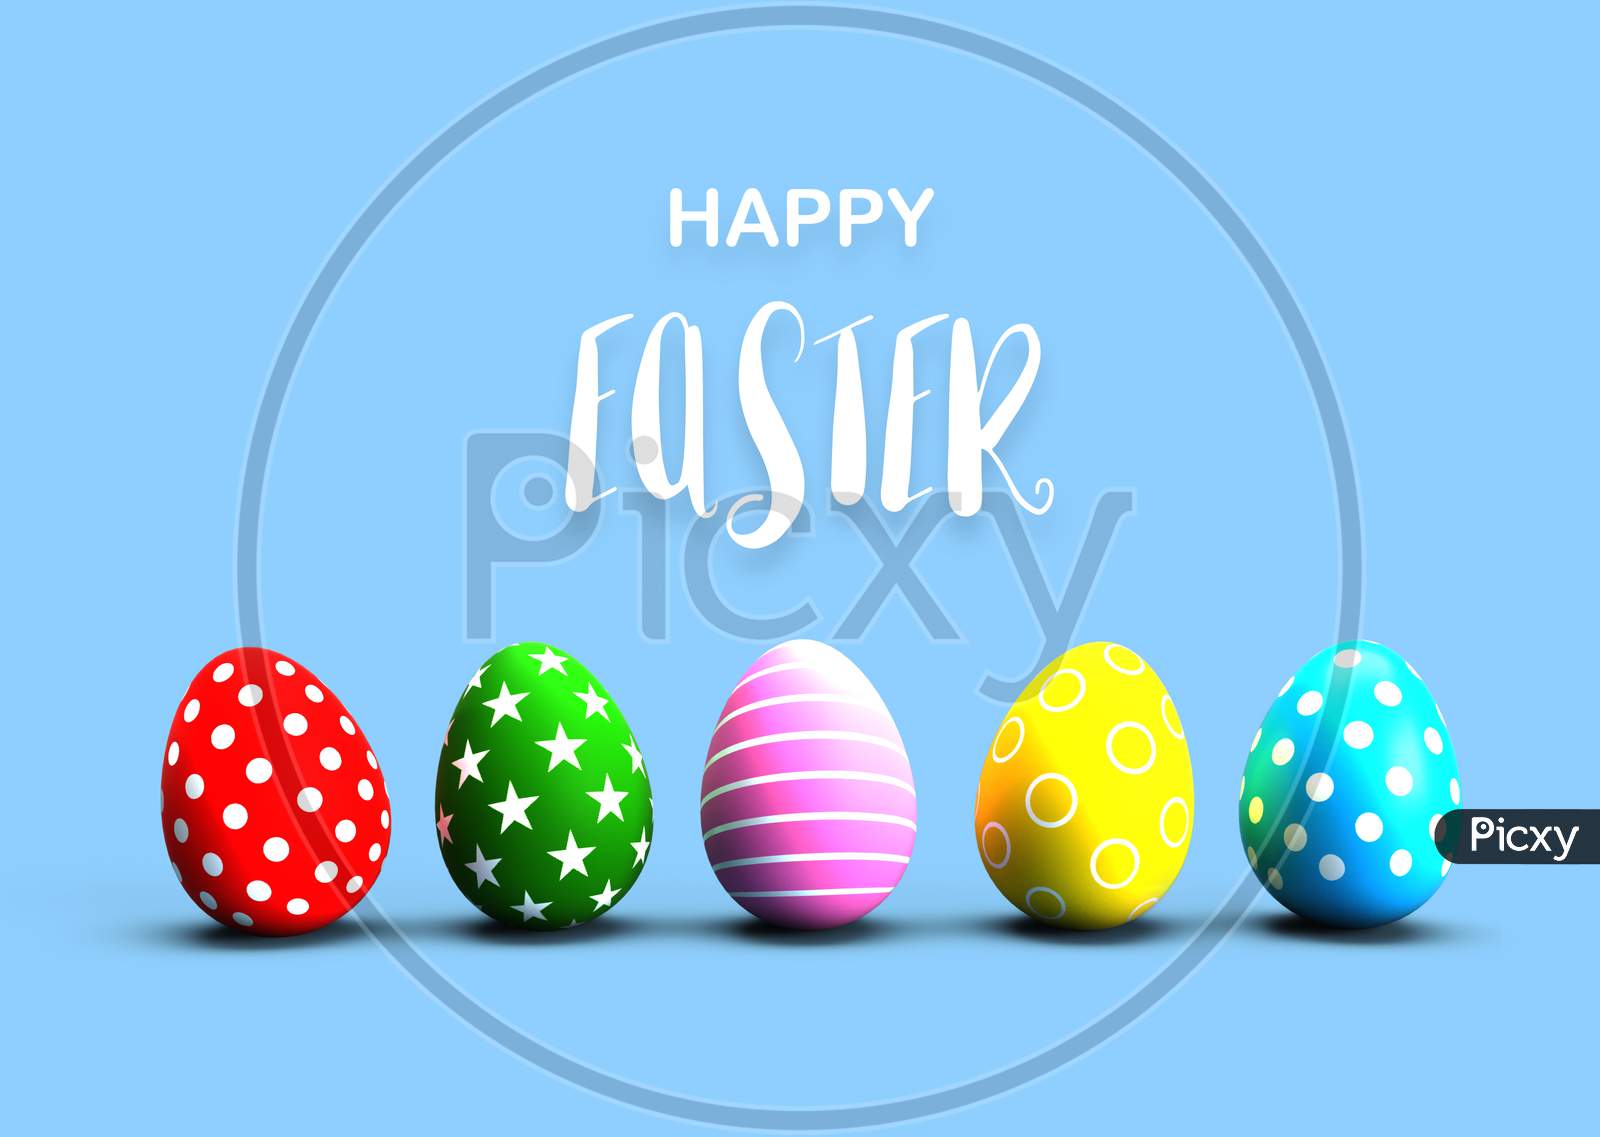 Colorful Painted Easter Eggs With Calligraphy Text On Blue Floor Background. Holiday And Festival Concept. Dot Star And Line Fantasy Pattern Art. 3D Illustration With Copy Space